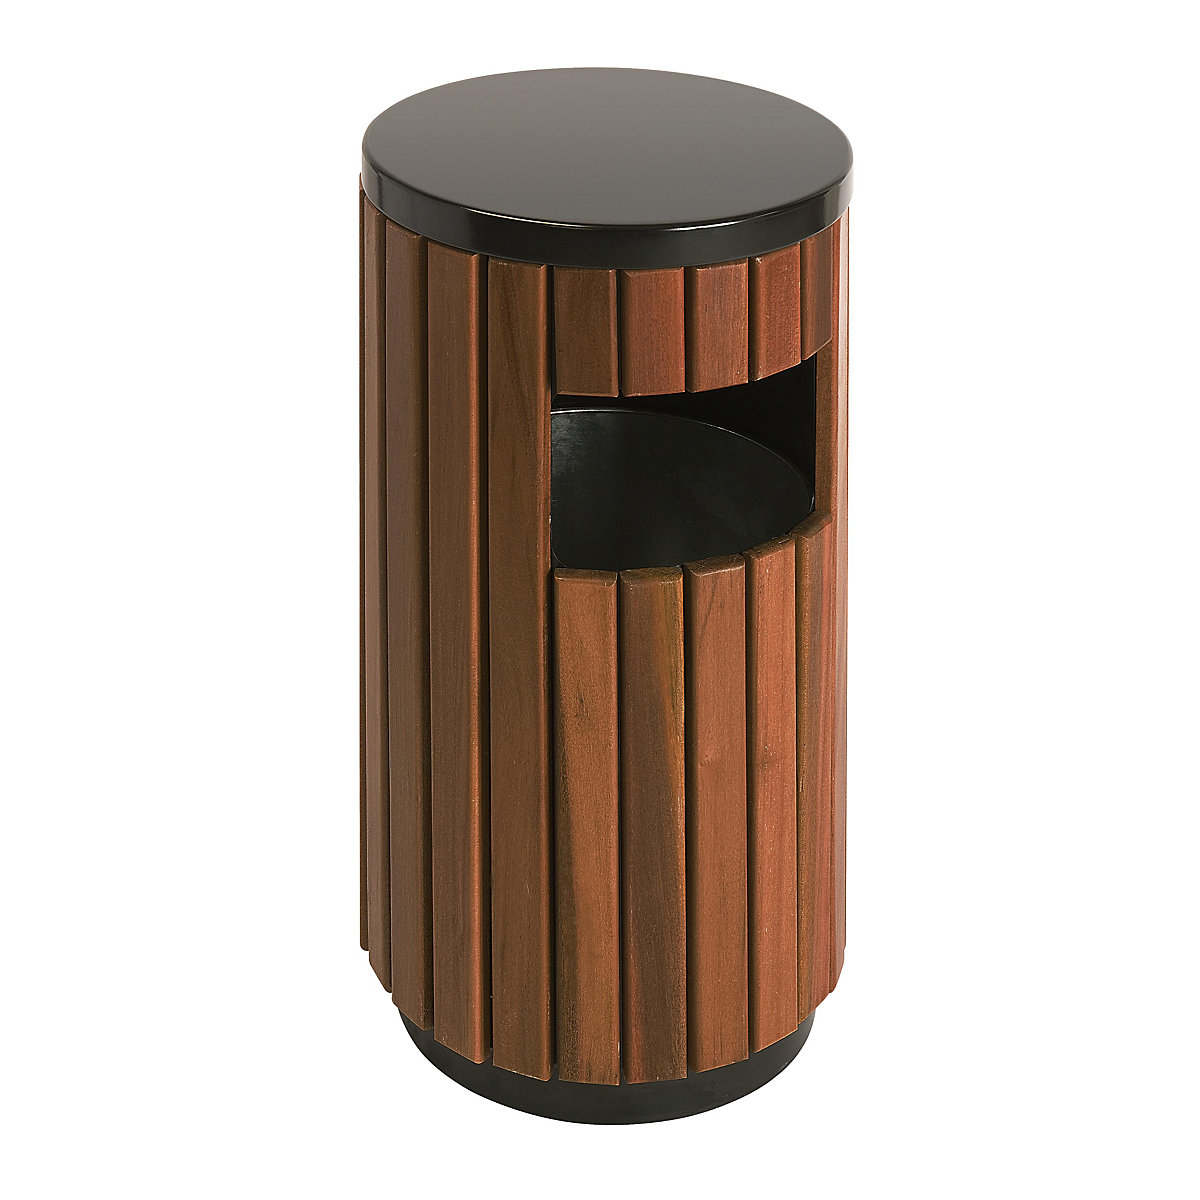 Outdoor waste collector, wood finish